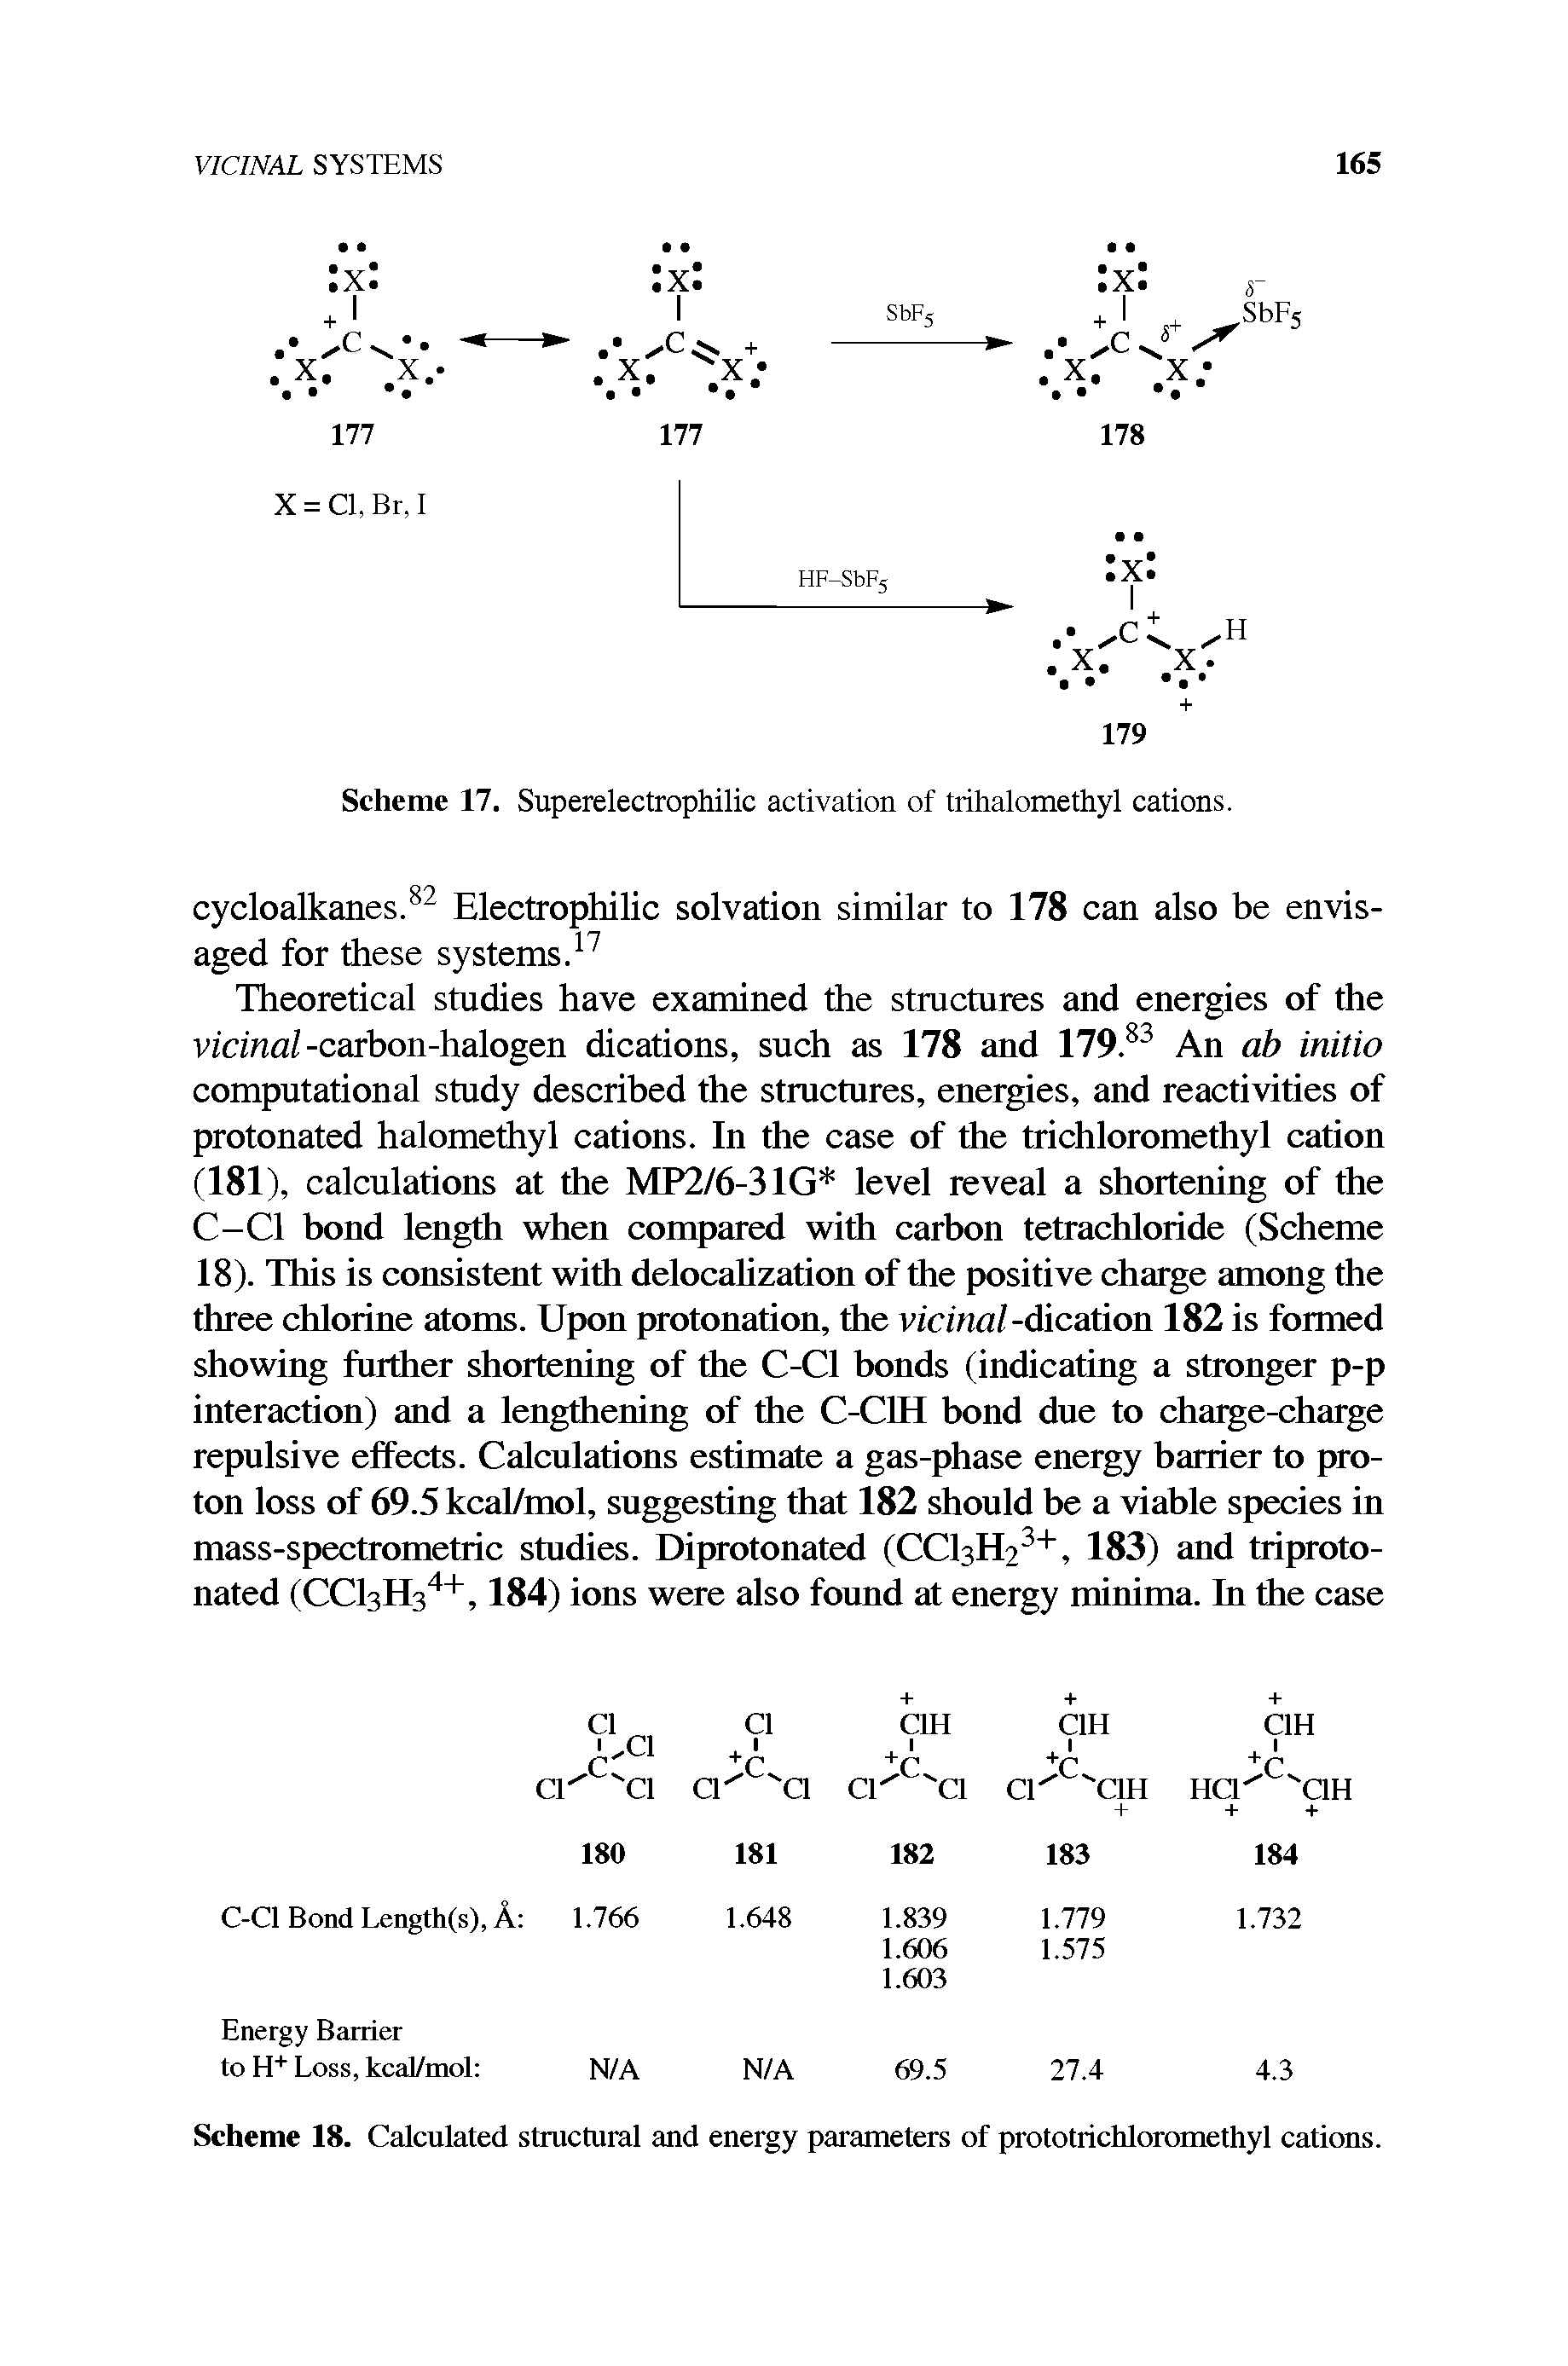 Scheme 18. Calculated structural and energy parameters of prototrichloromethyl cations.